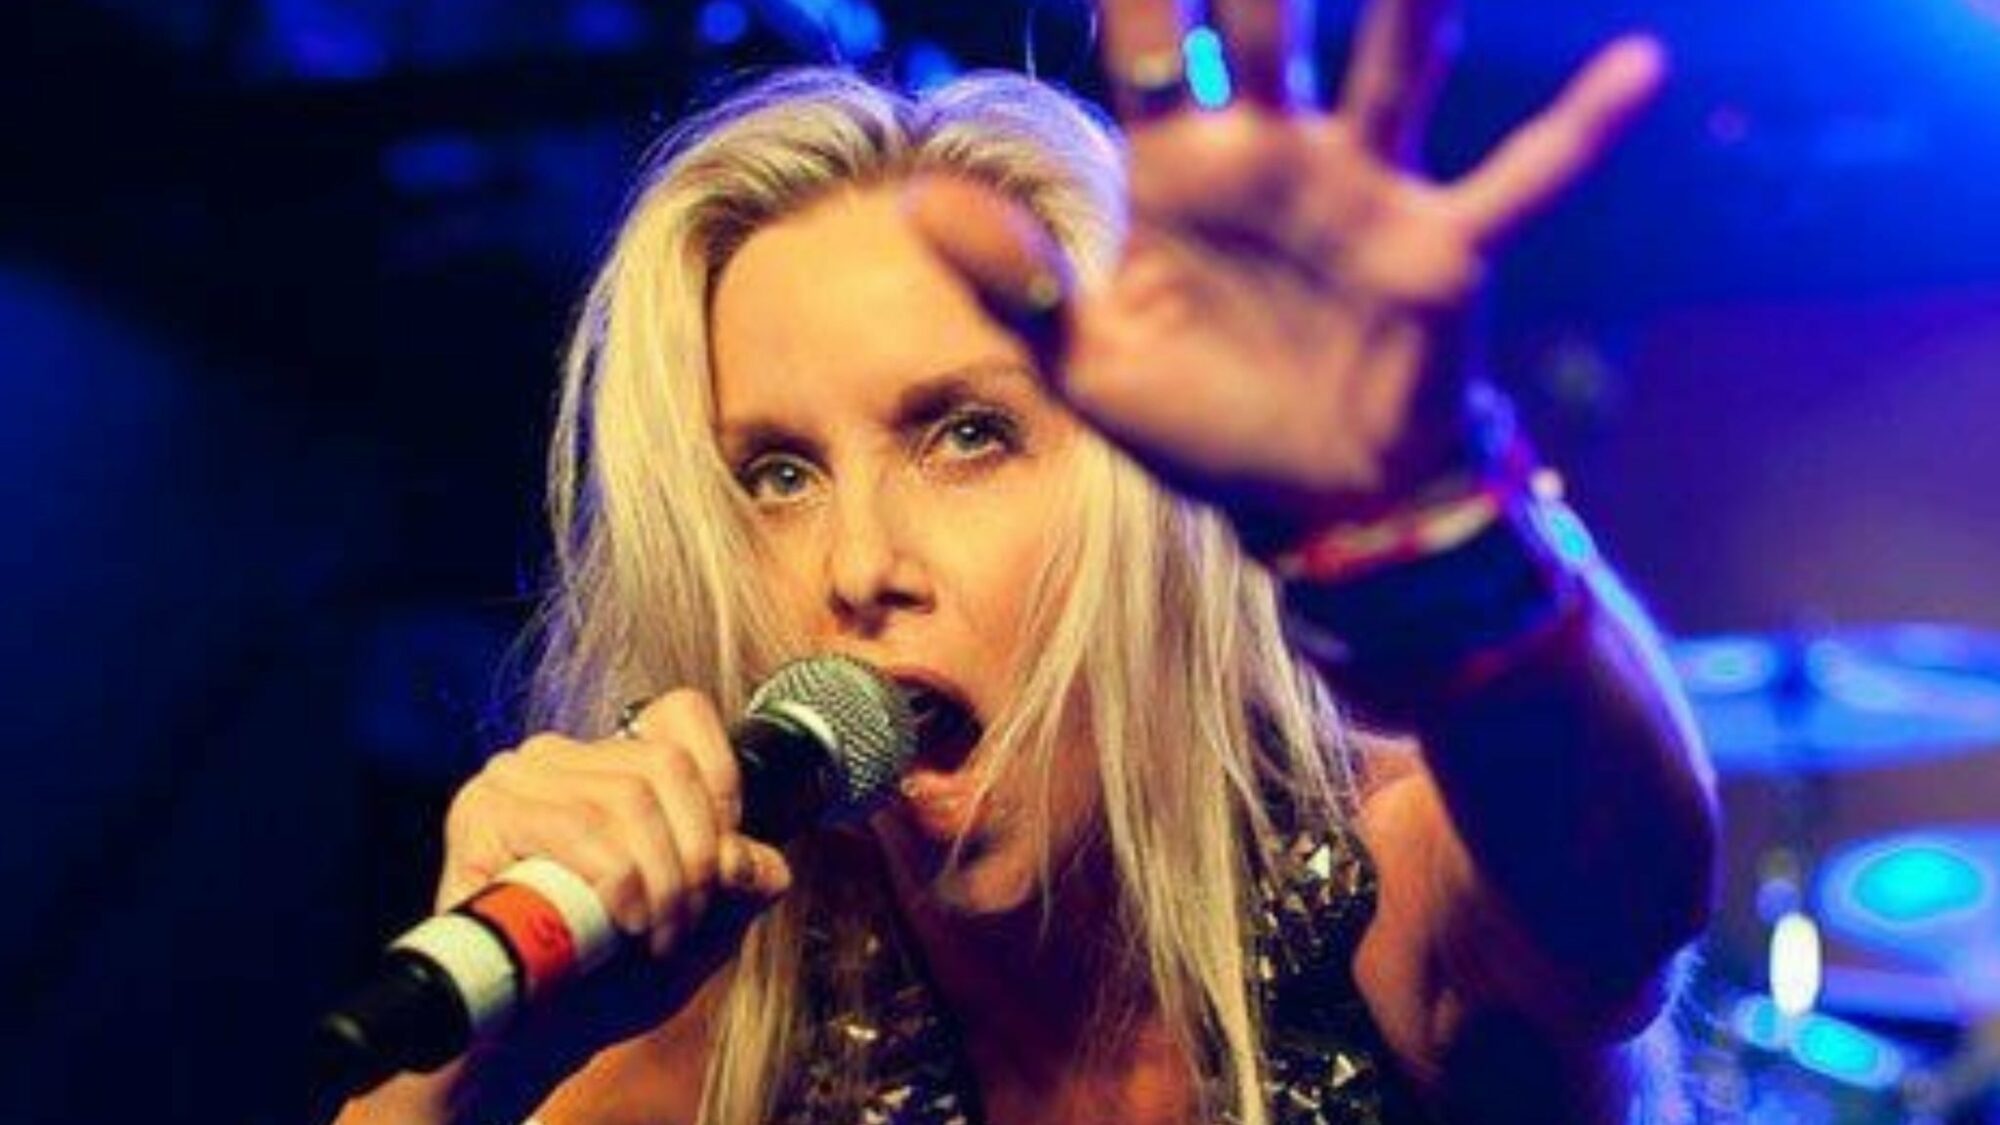 Image name Cherie Currie the Voice of the Runaways at Nightrain Bradford the 18 image from the post Cherie Currie - the Voice of the Runaways at Nightrain, Bradford in Yorkshire.com.